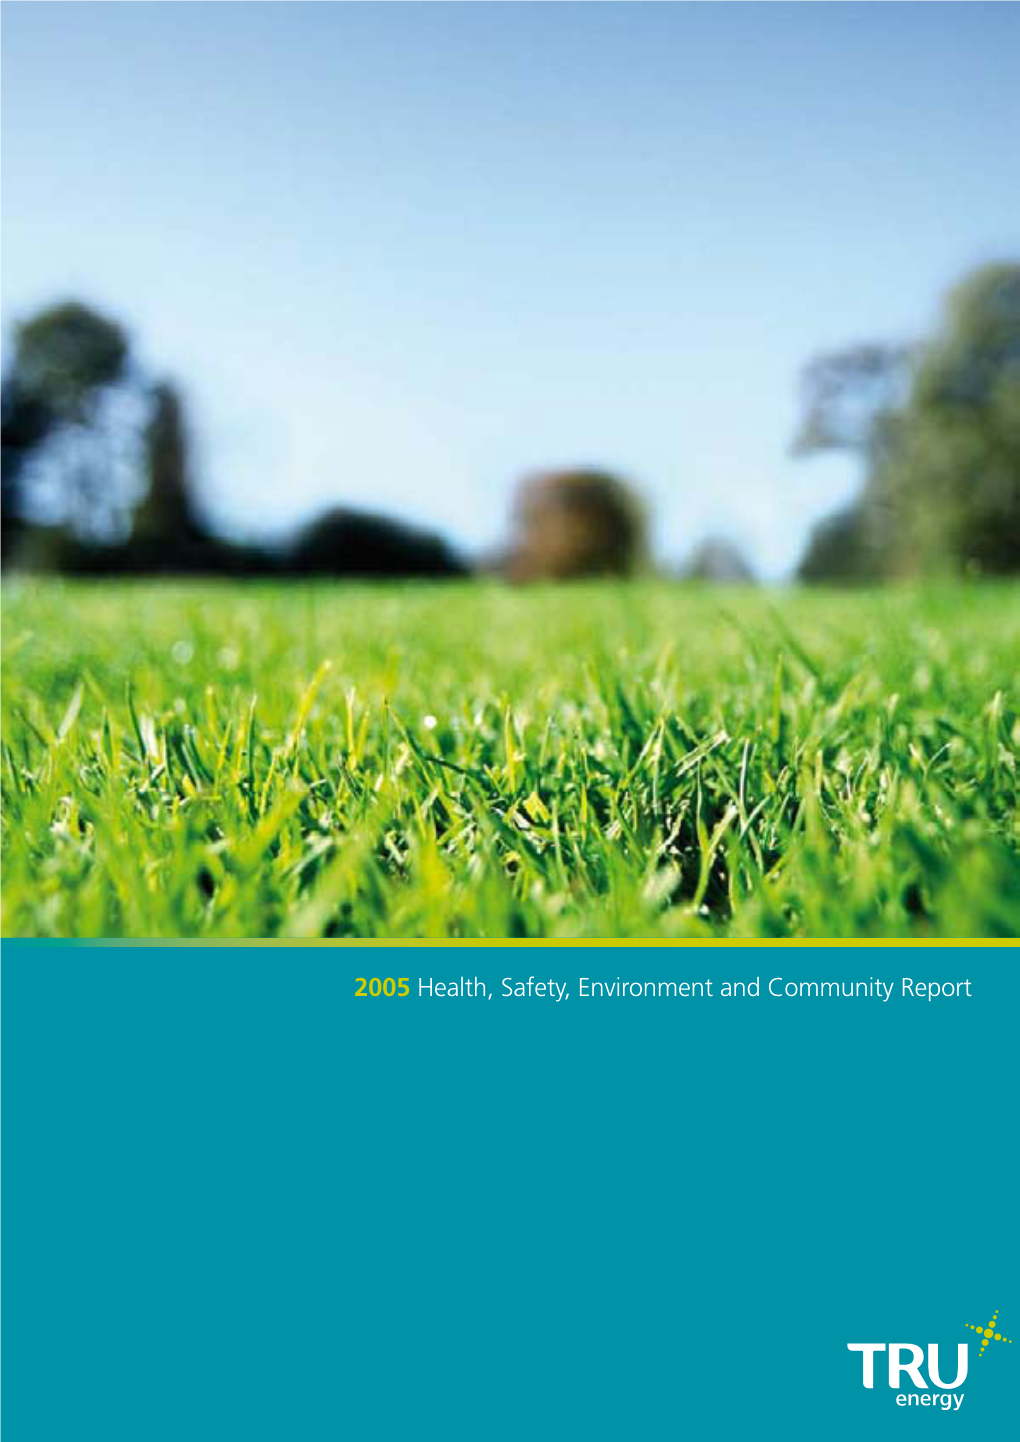 2005 Health, Safety, Environment and Community Report